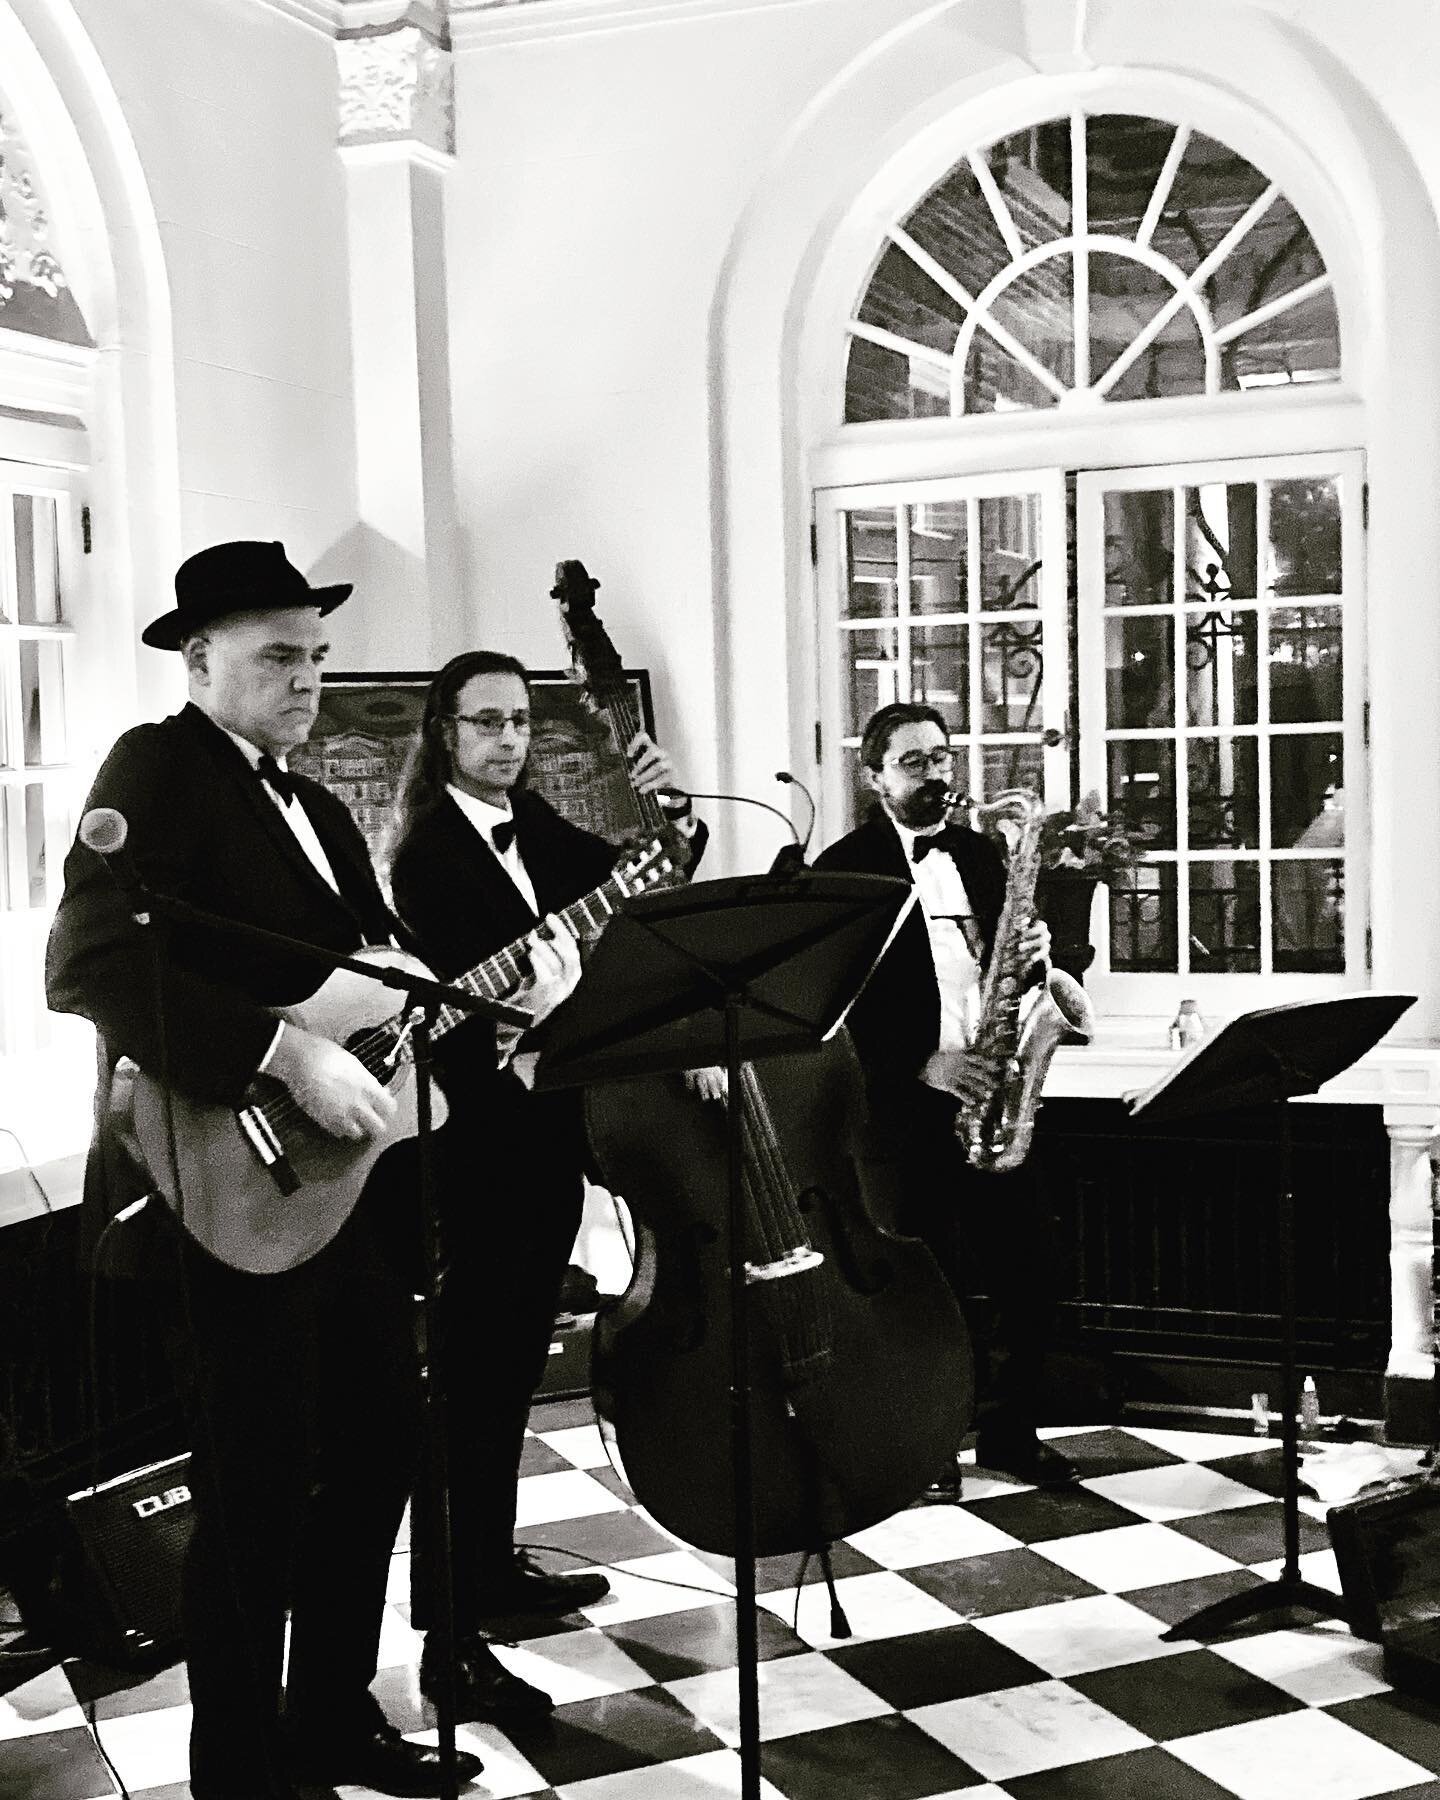 Jump Jive Swing set the mood perfectly with tunes from the roaring twenties on, to match the arc of an iconic building in Kansas City. Wonderful musicians&mdash;Aaron Bush on guitar; Mark Hamblin on upright bass; Scott Reed on clarinet/saxophone&mdas